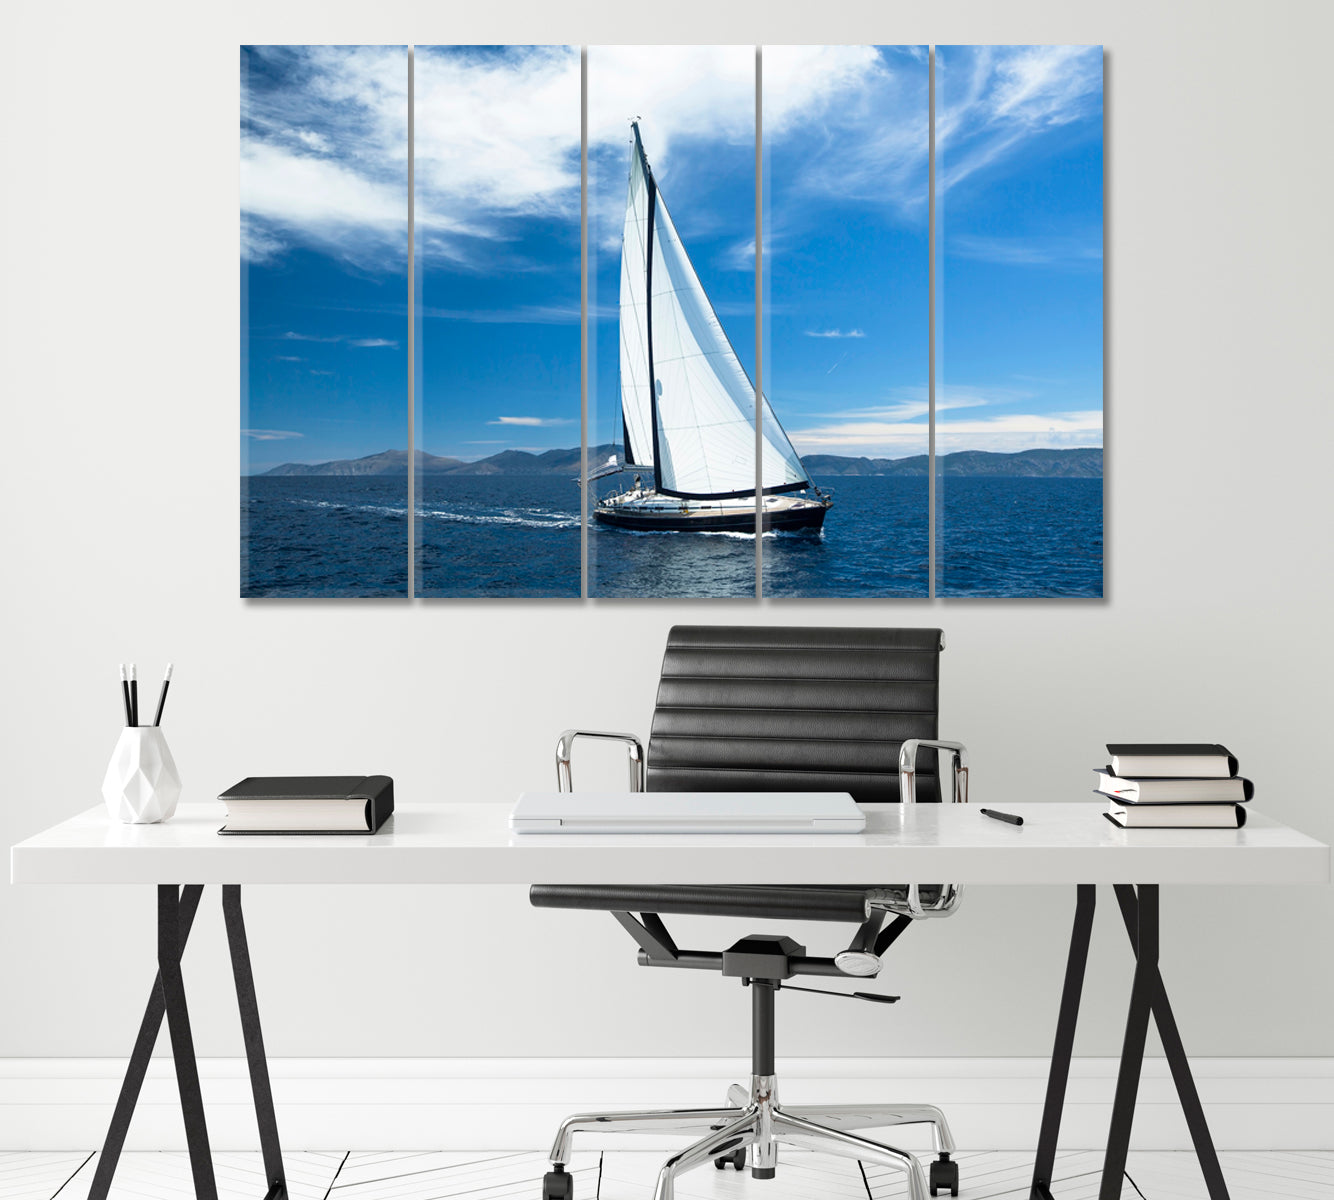 Sailing Ship with White Sails in Sea Canvas Print ArtLexy 5 Panels 36"x24" inches 